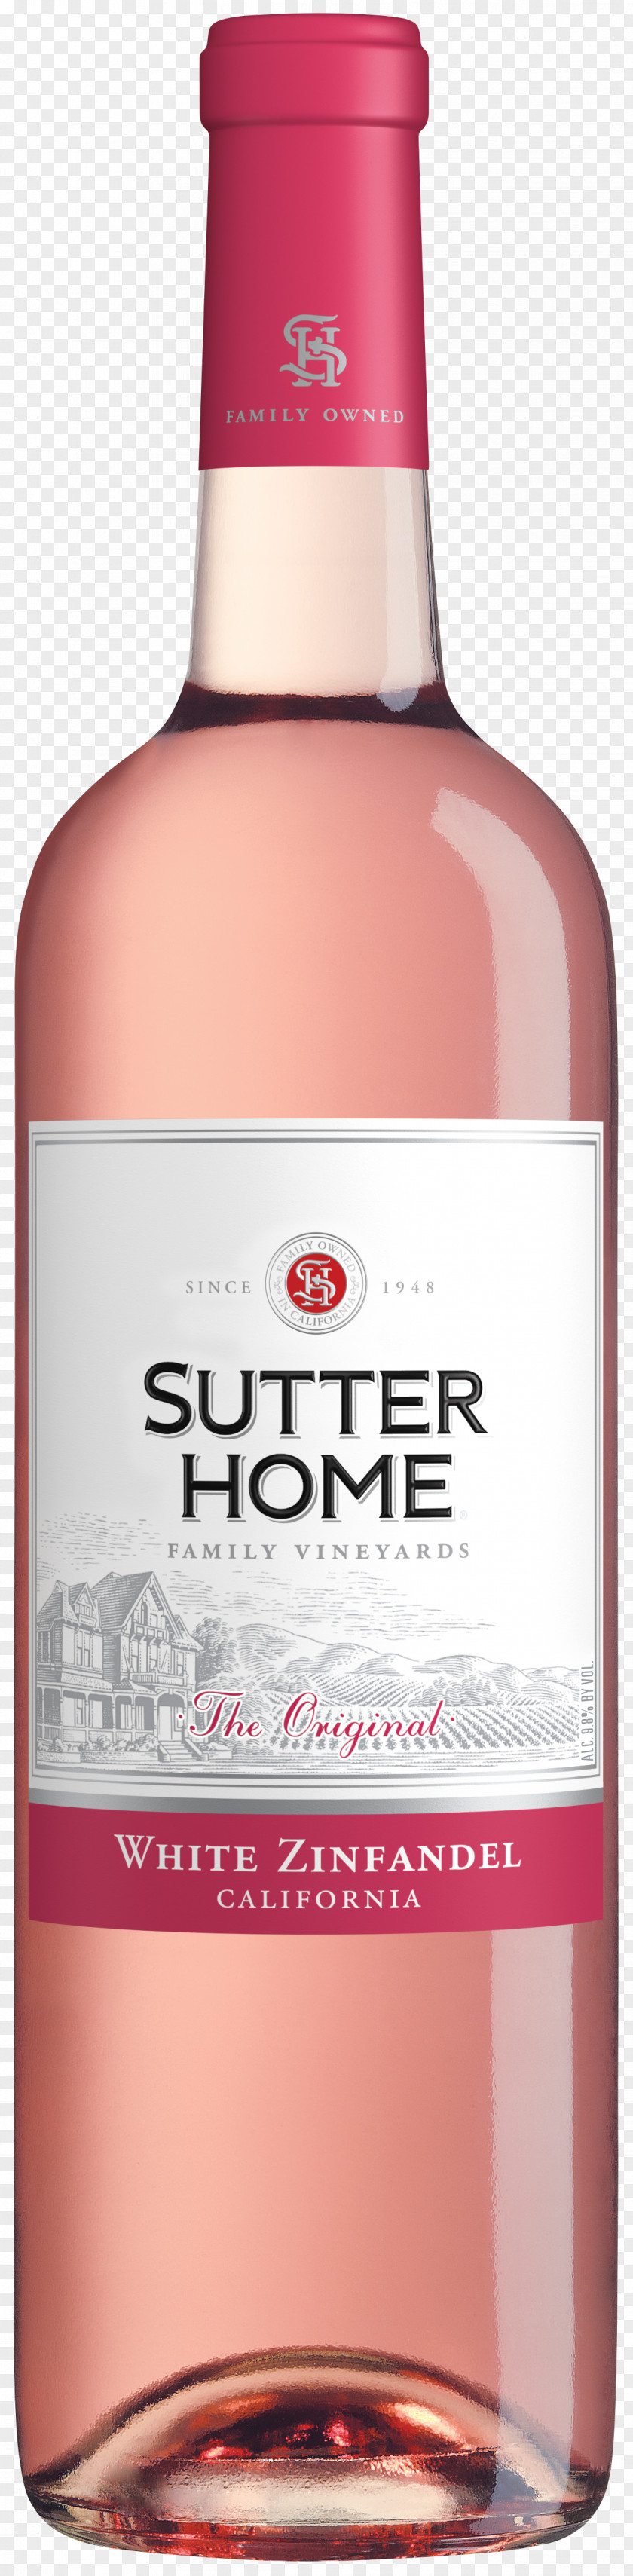 Wine White Zinfandel Sutter Home Winery PNG